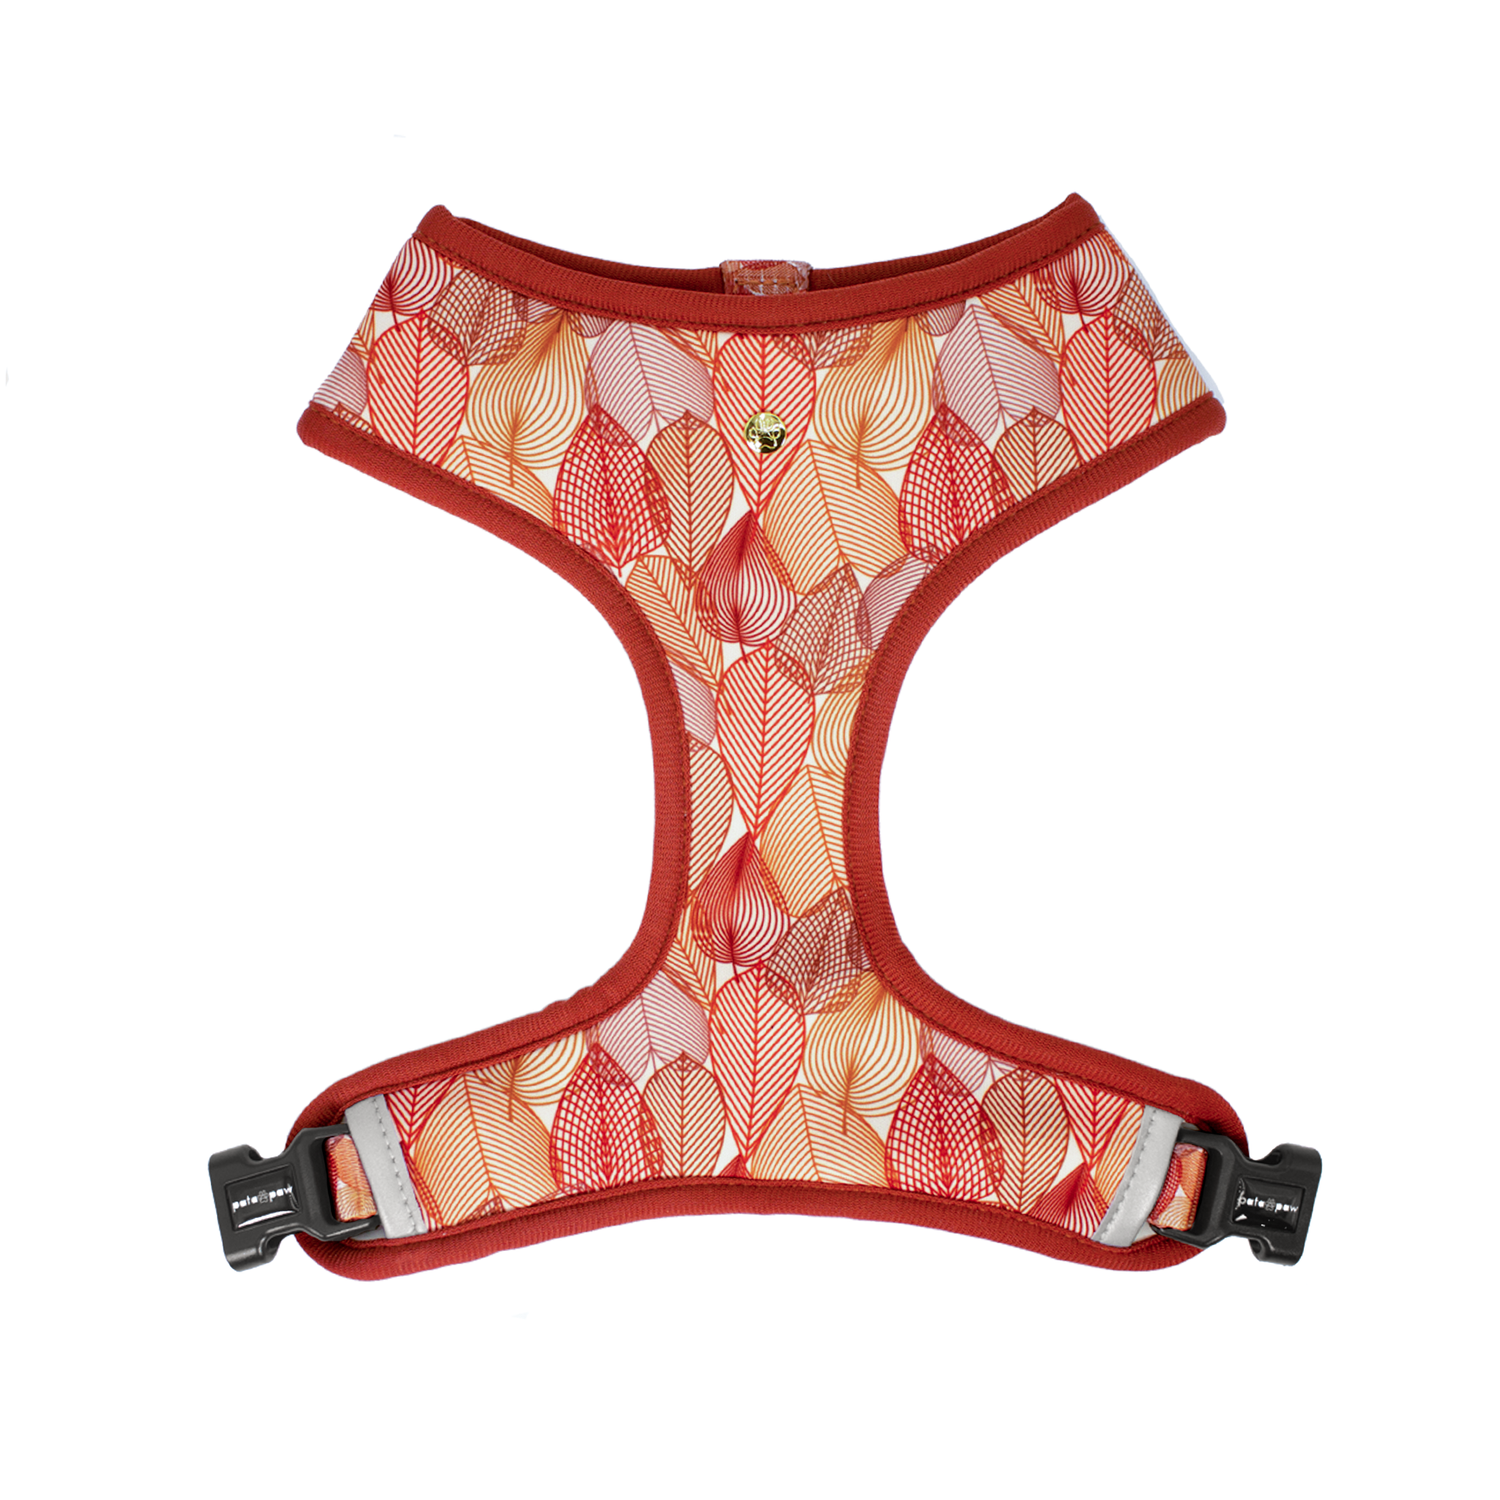 Pata Paw autumn crunch reversible harness showing its pattern.